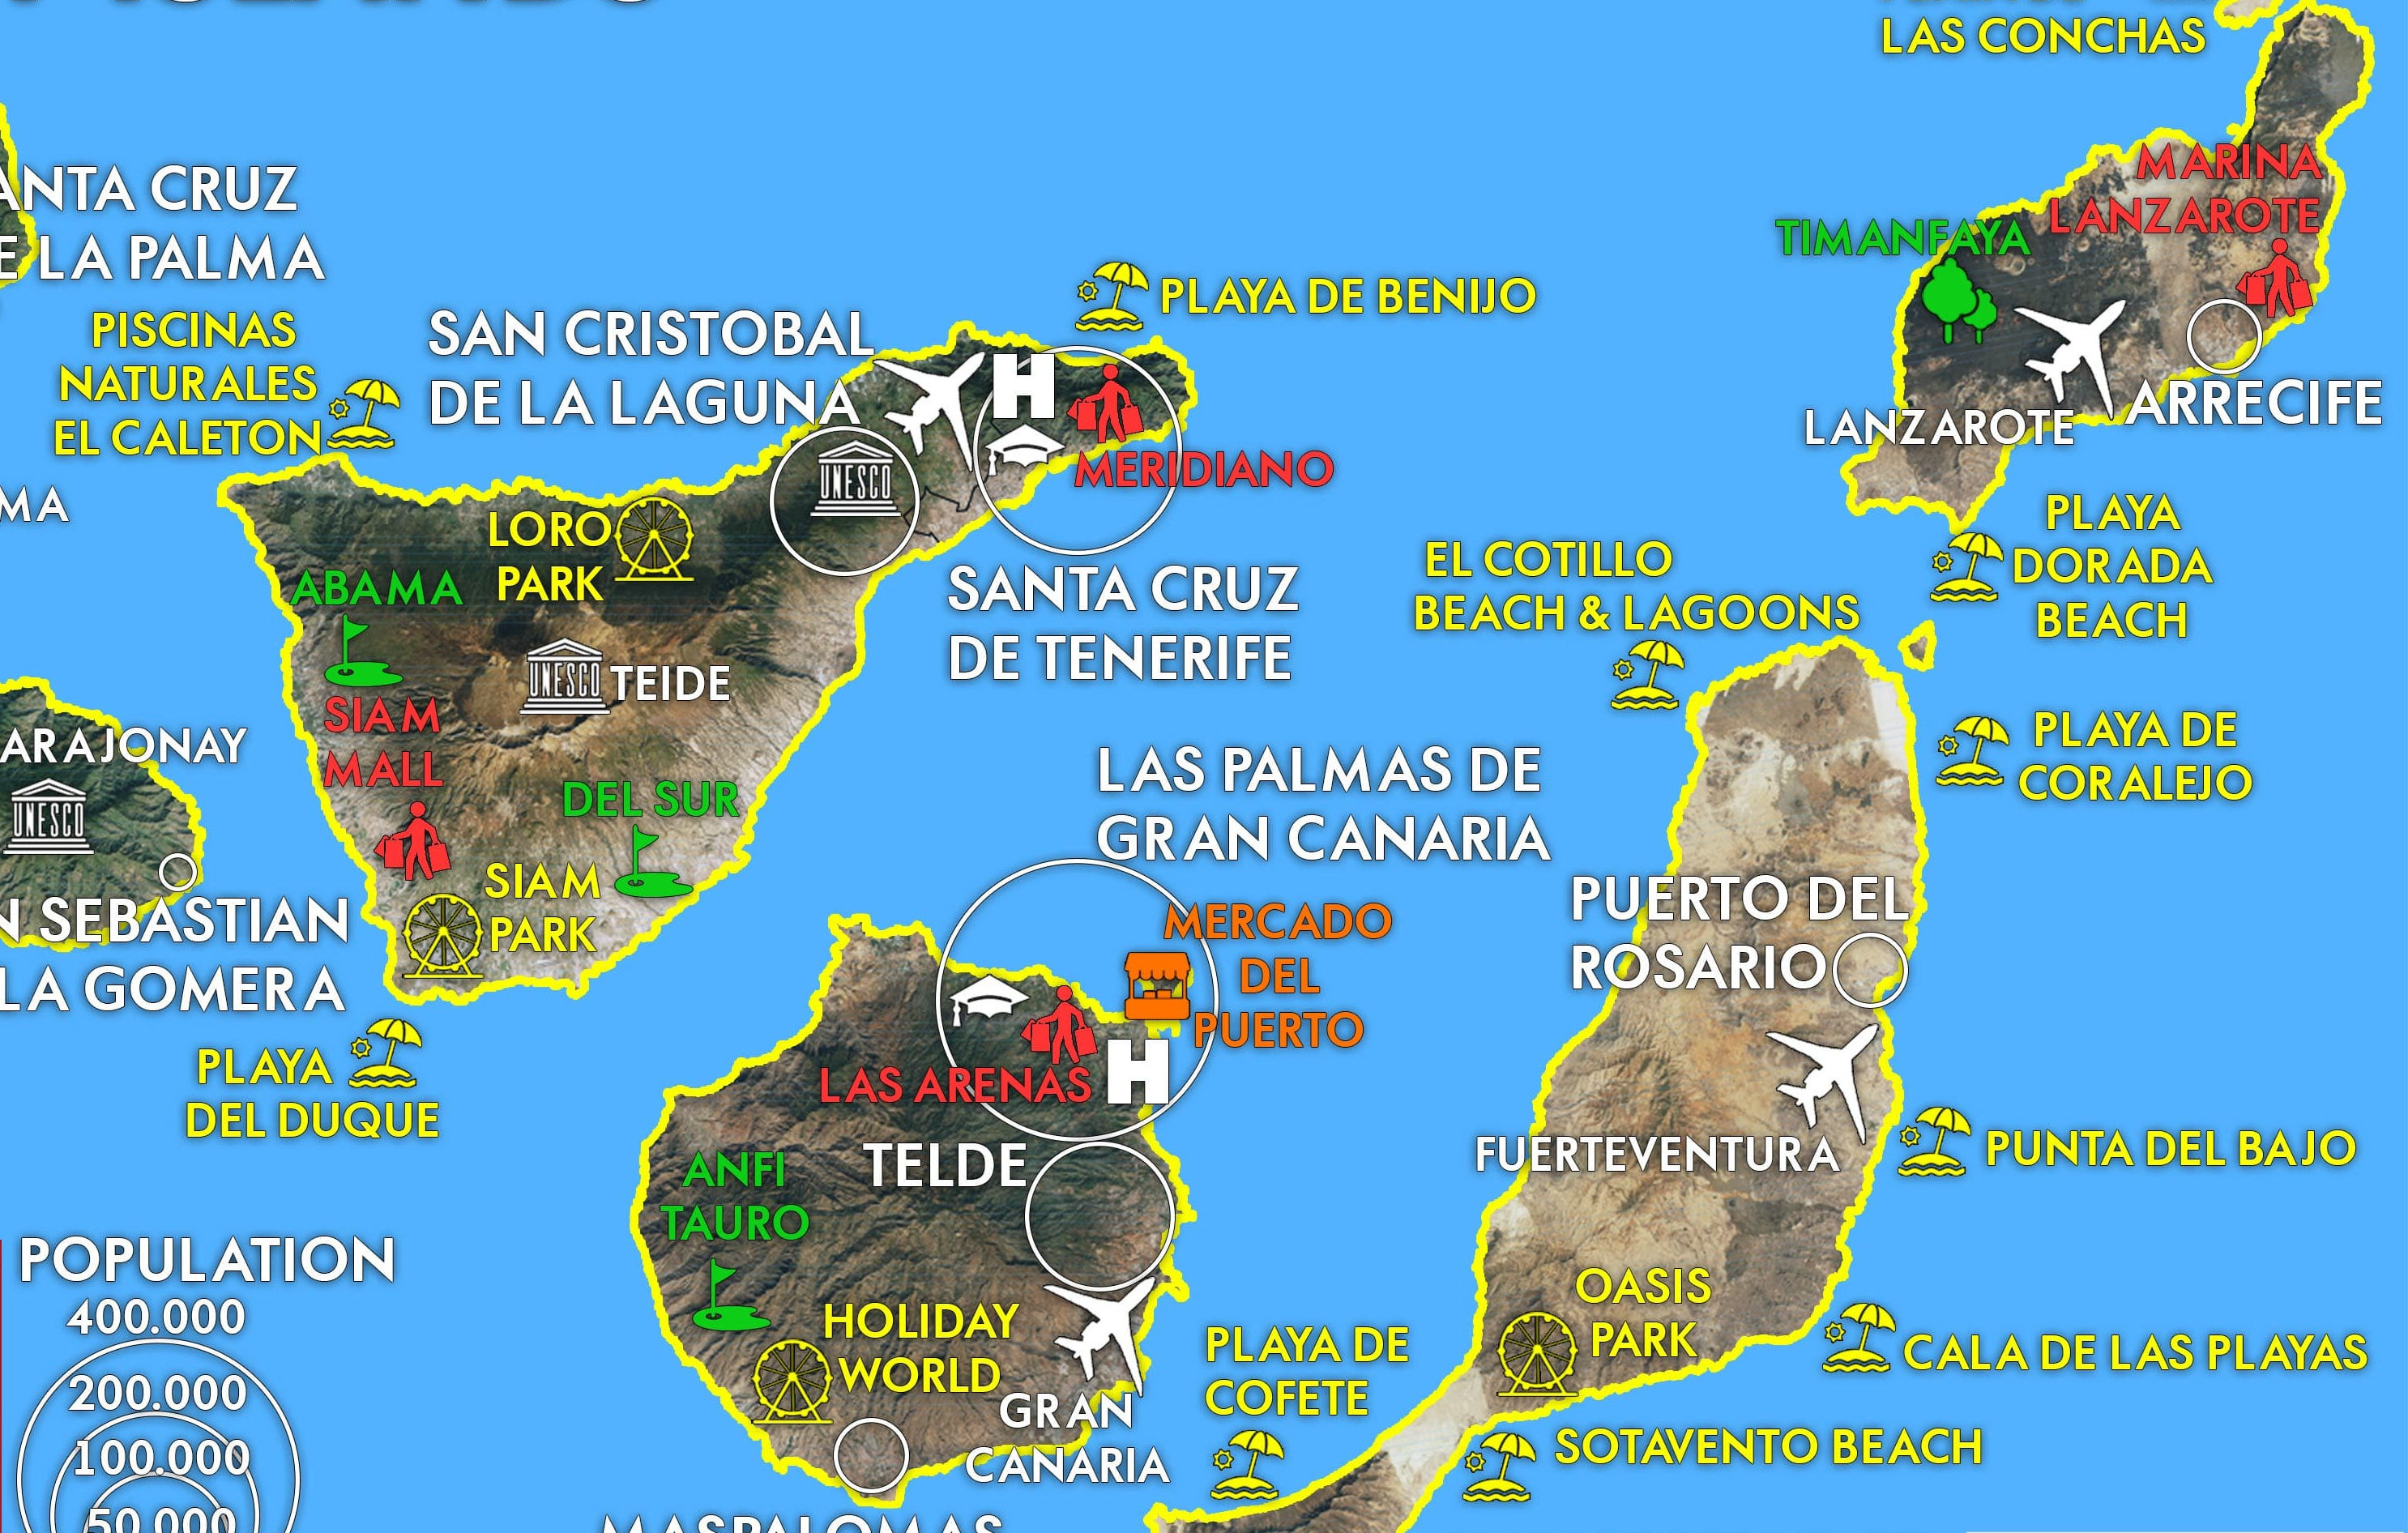 Geographical maps of the Canary Islands